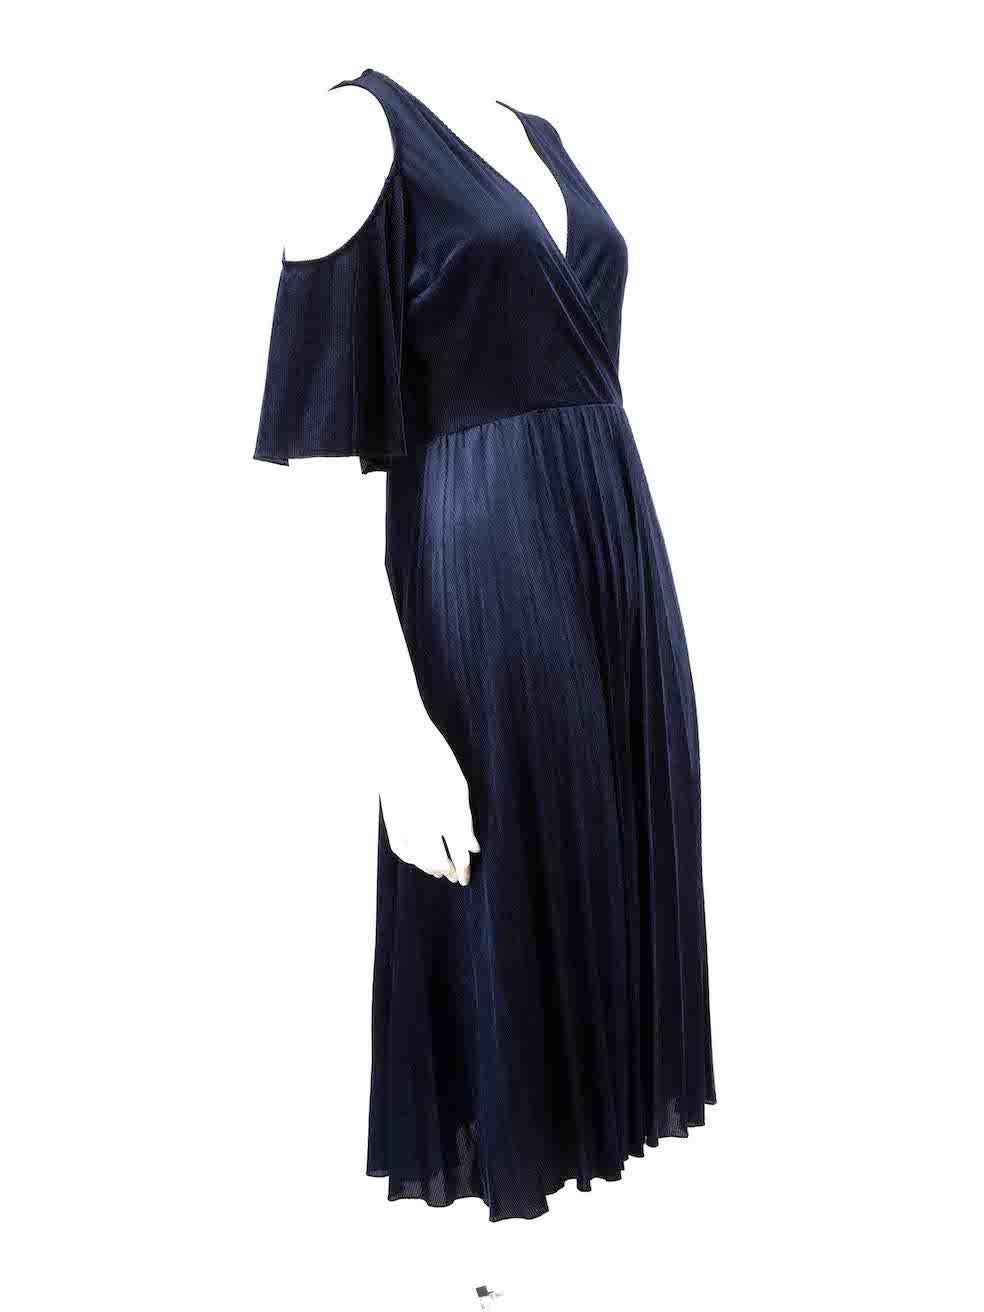 CONDITION is Never worn, with tags. No visible wear to dress is evident on this new Maje designer resale item.
 
 
 
 Details
 
 
 Navy
 
 Corduroy
 
 Midi dress
 
 V neckline
 
 Pleated skirt
 
 Corduroy textured
 
 Cold shoulder accent
 
 Side zip